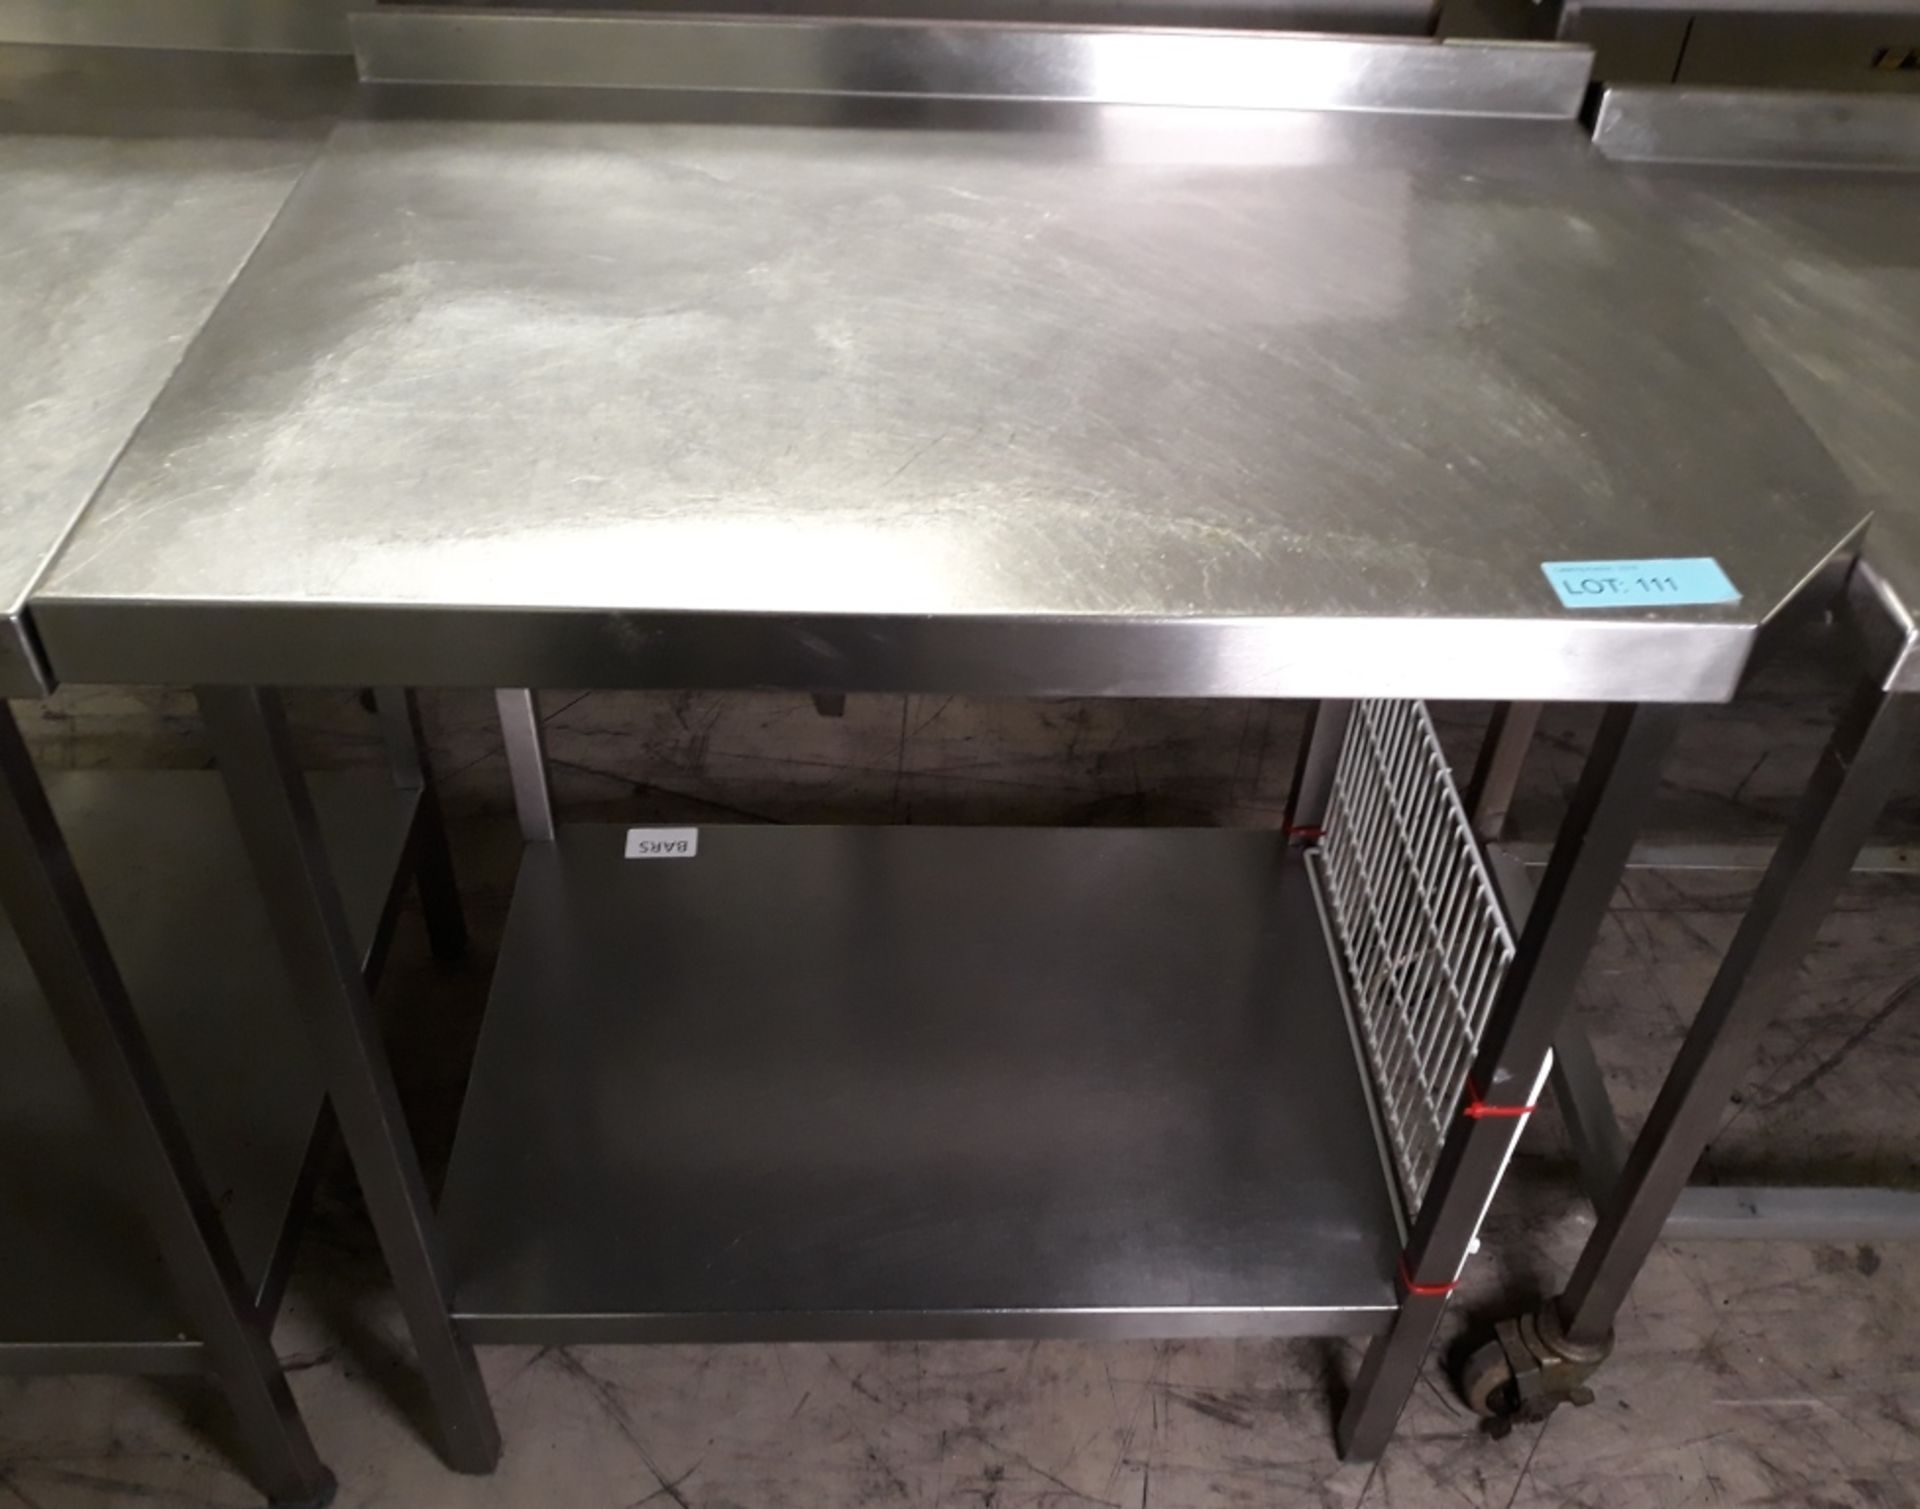 Stainless steel table - 90 x 65cm.